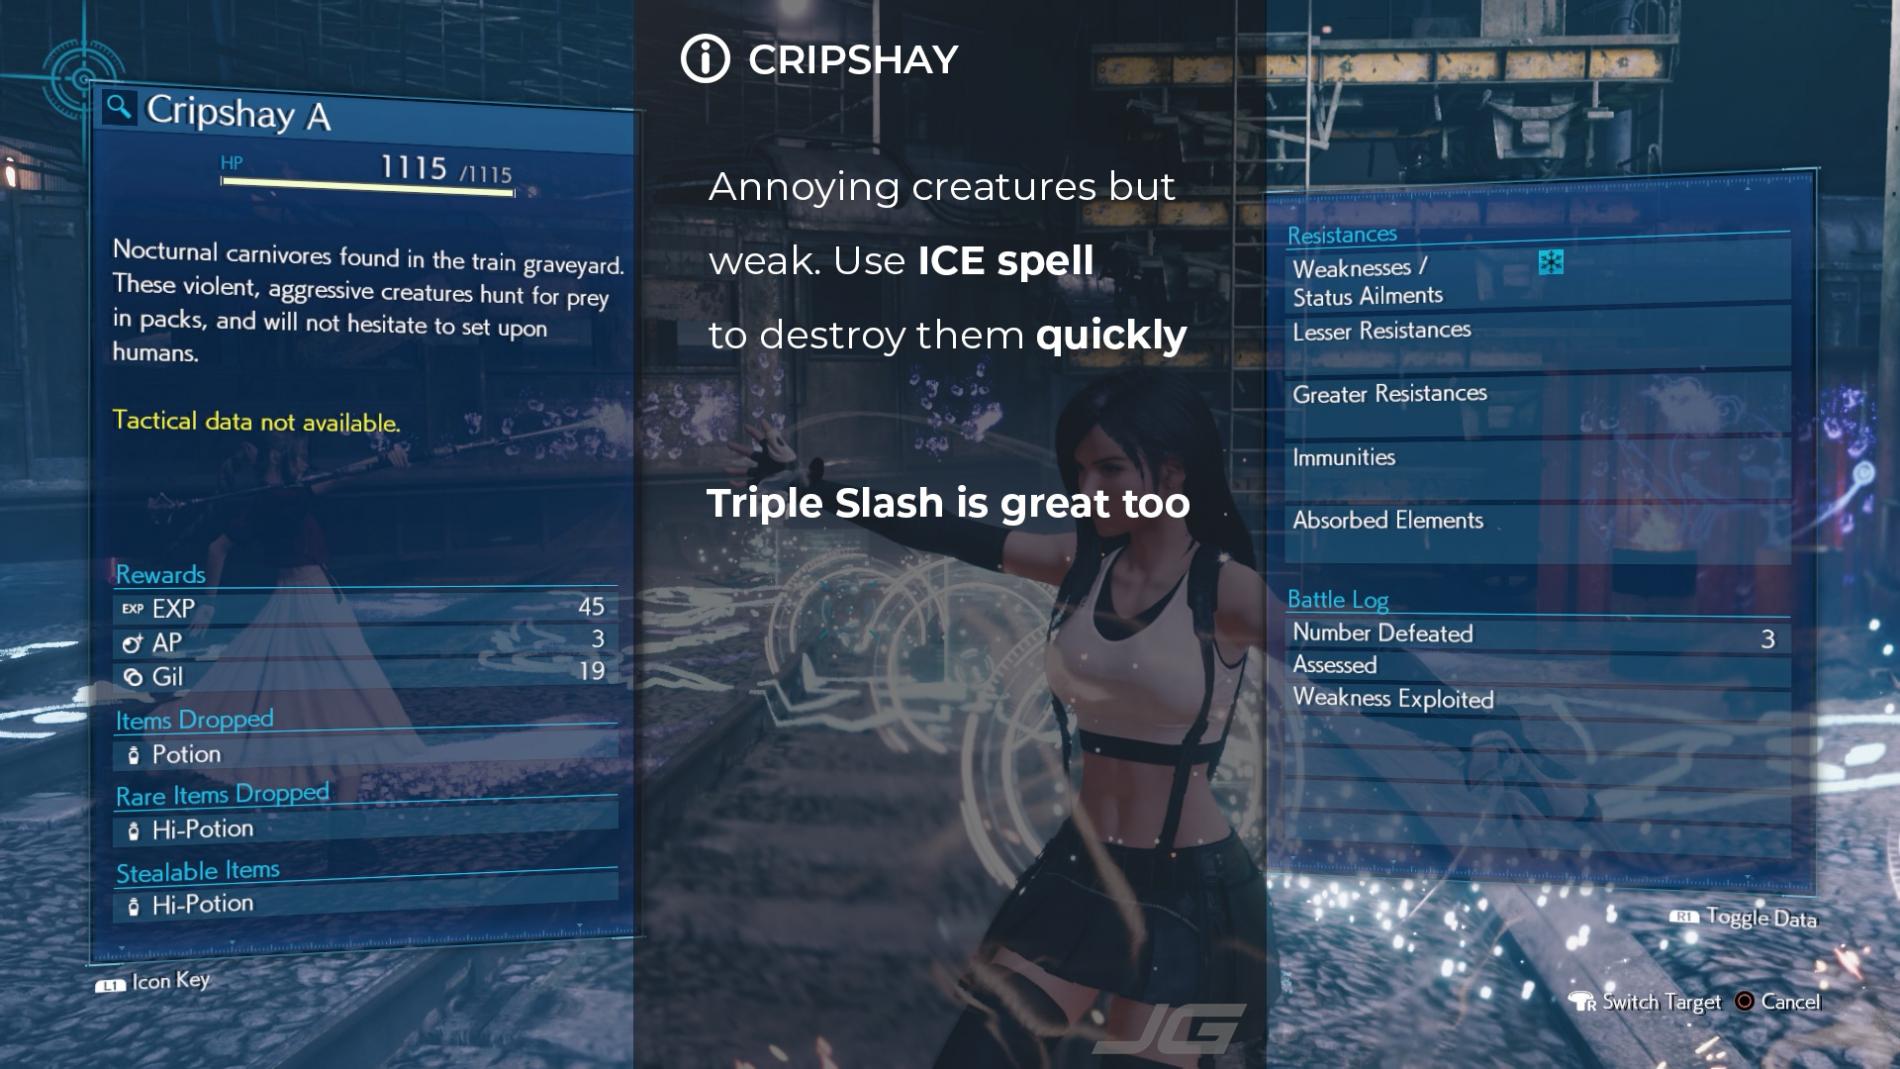 CRIPSHAY - Annoying creatures but weak. Use ICE spell to destroy them quickly Triple Slash is great too